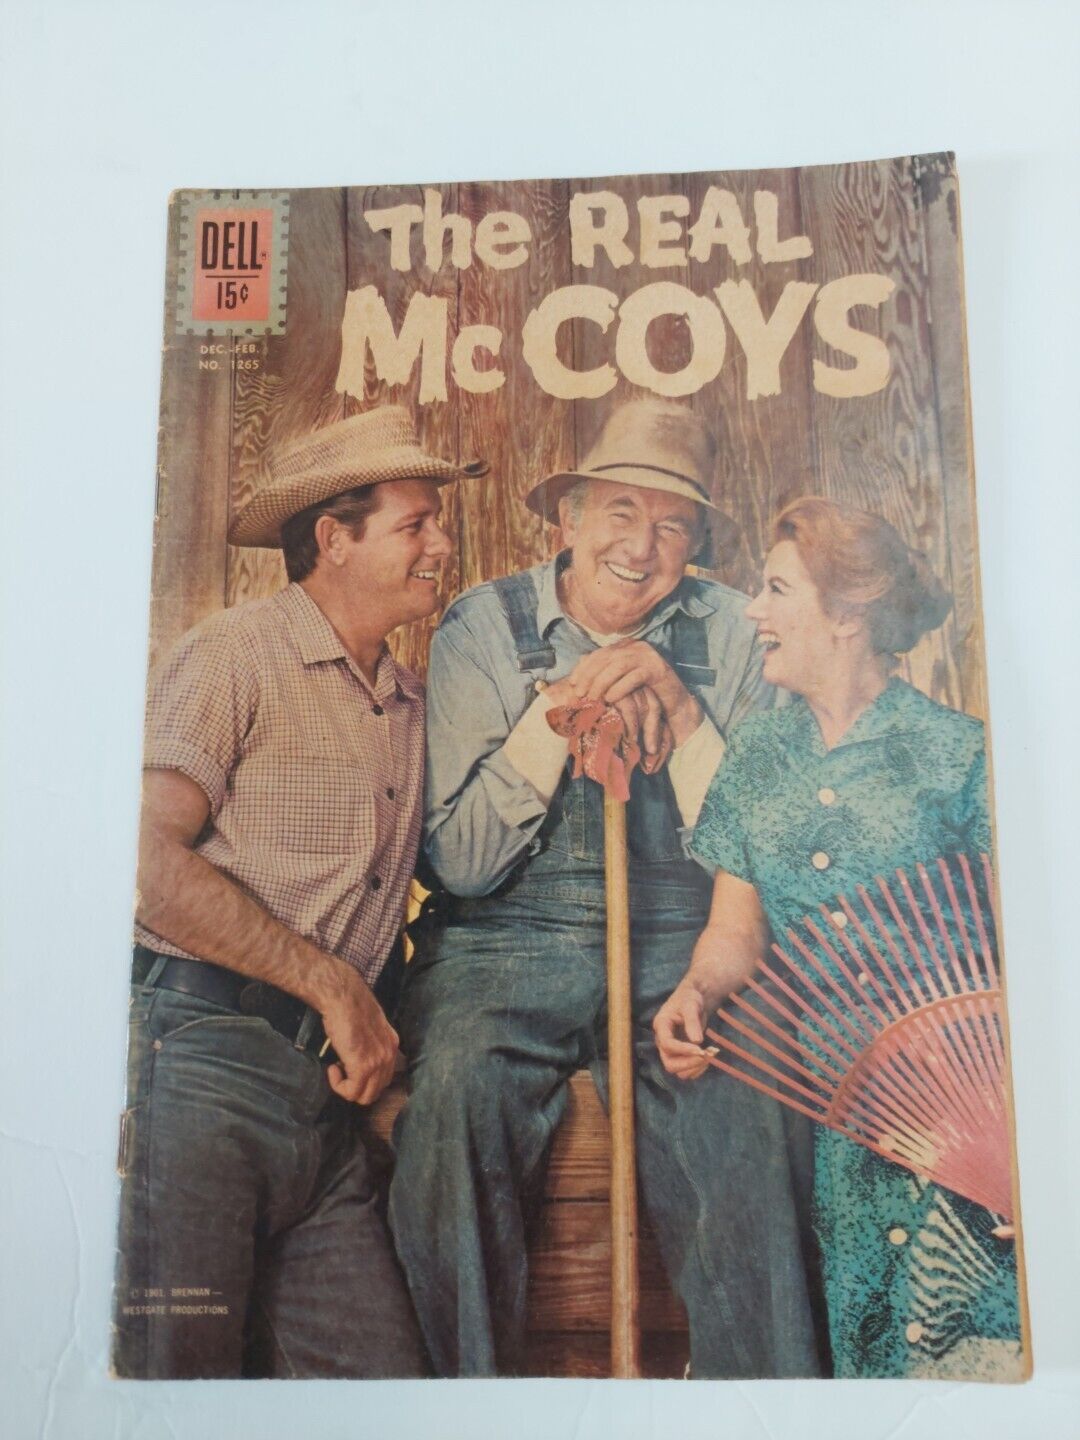 FOUR COLOR #1265 THE REAL MCCOYS 1962 DELL COMICS SILVER AGE PHOTO COVER